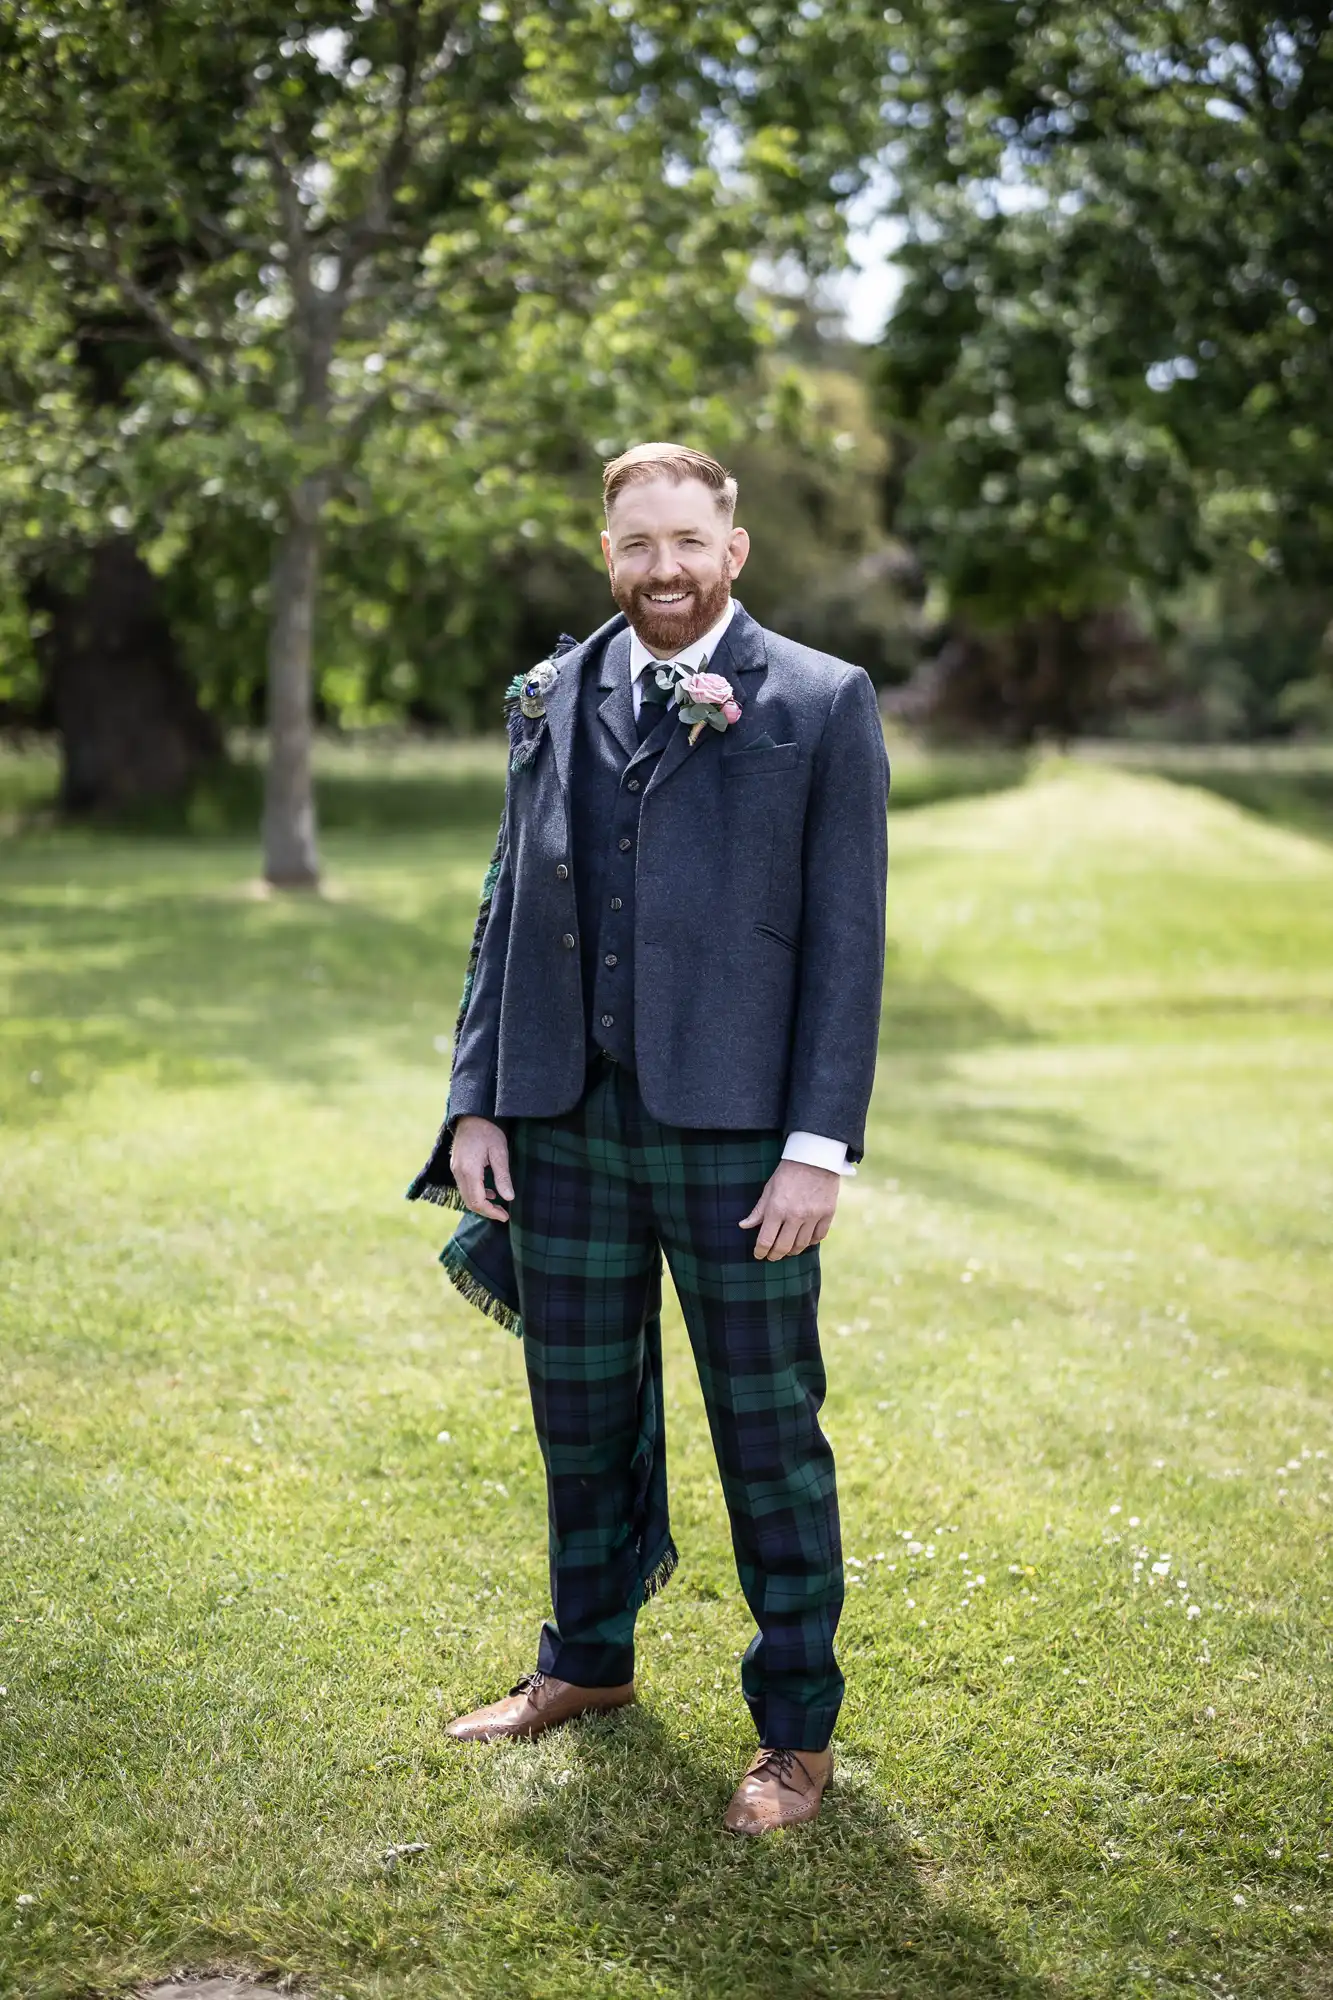 A man in a blue blazer and green tartan trousers stands smiling in a sunny park, holding a hat and wearing a boutonniere.